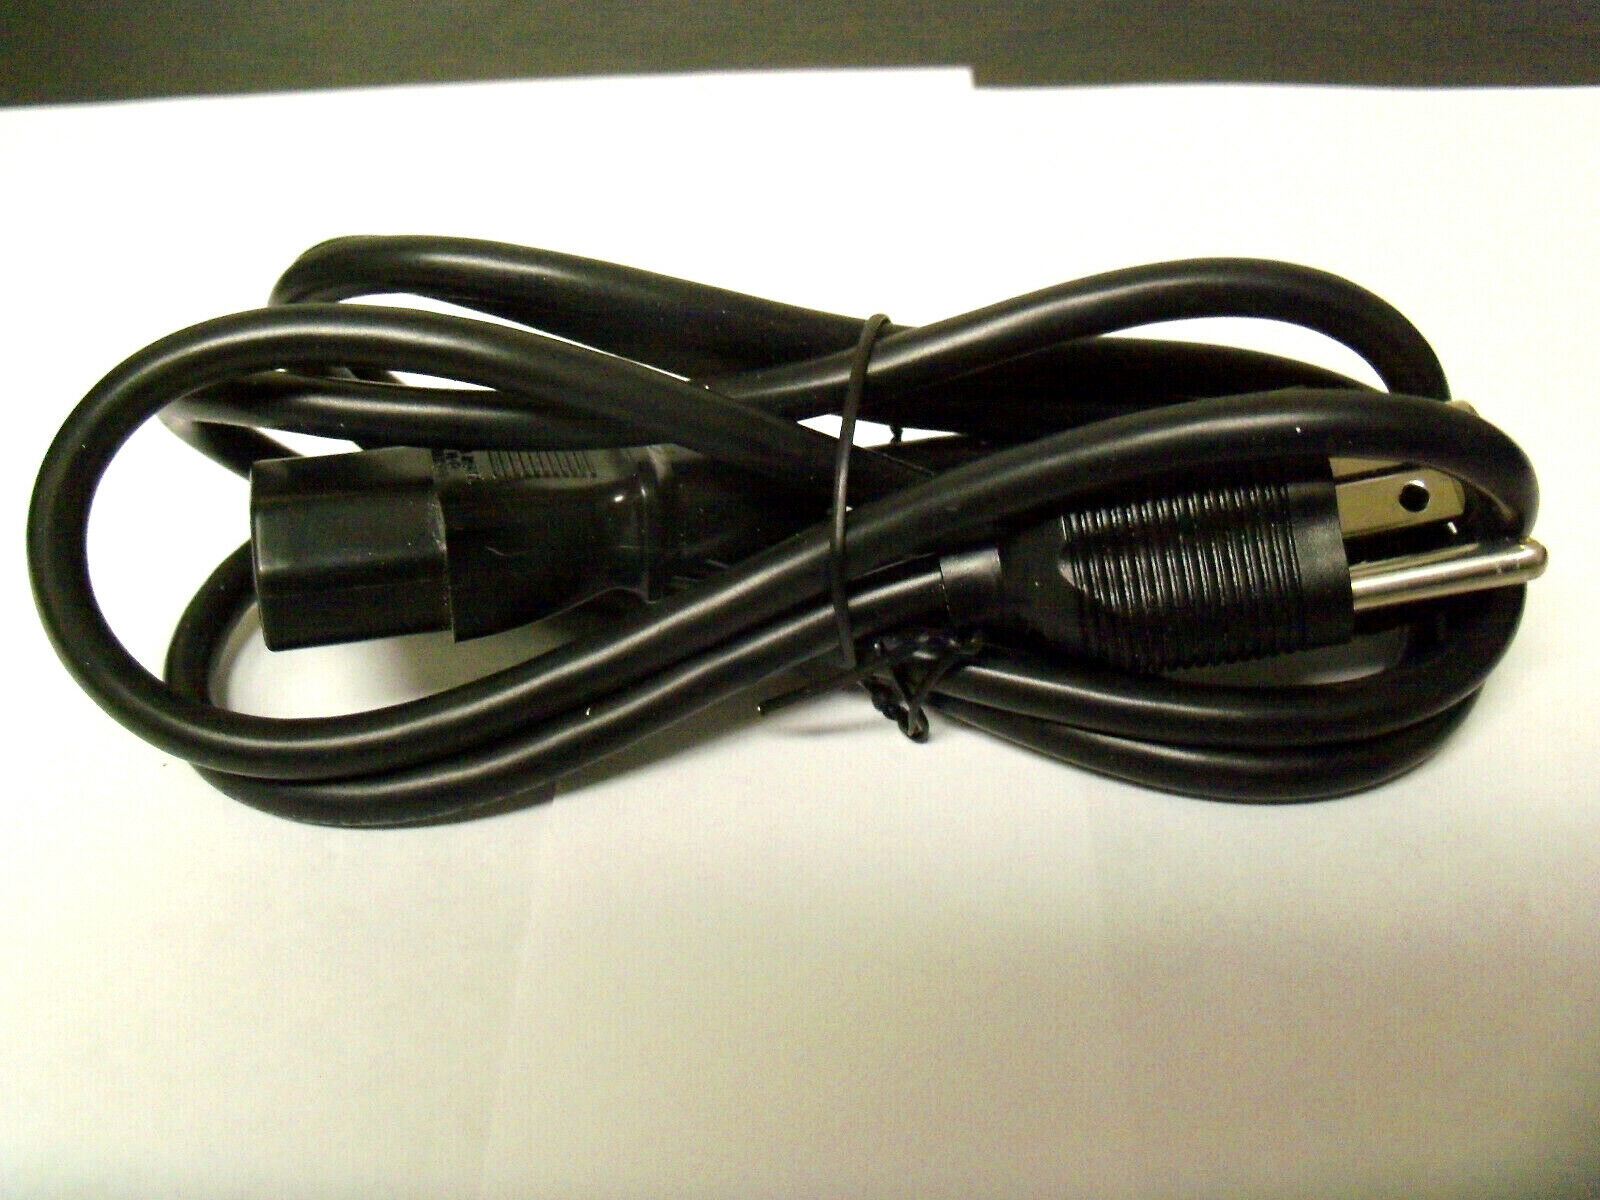 3-Prong 6\' Power Cord I-SHENG IS-14 SP-305 LL41230 10A 125V 1250W New Condition